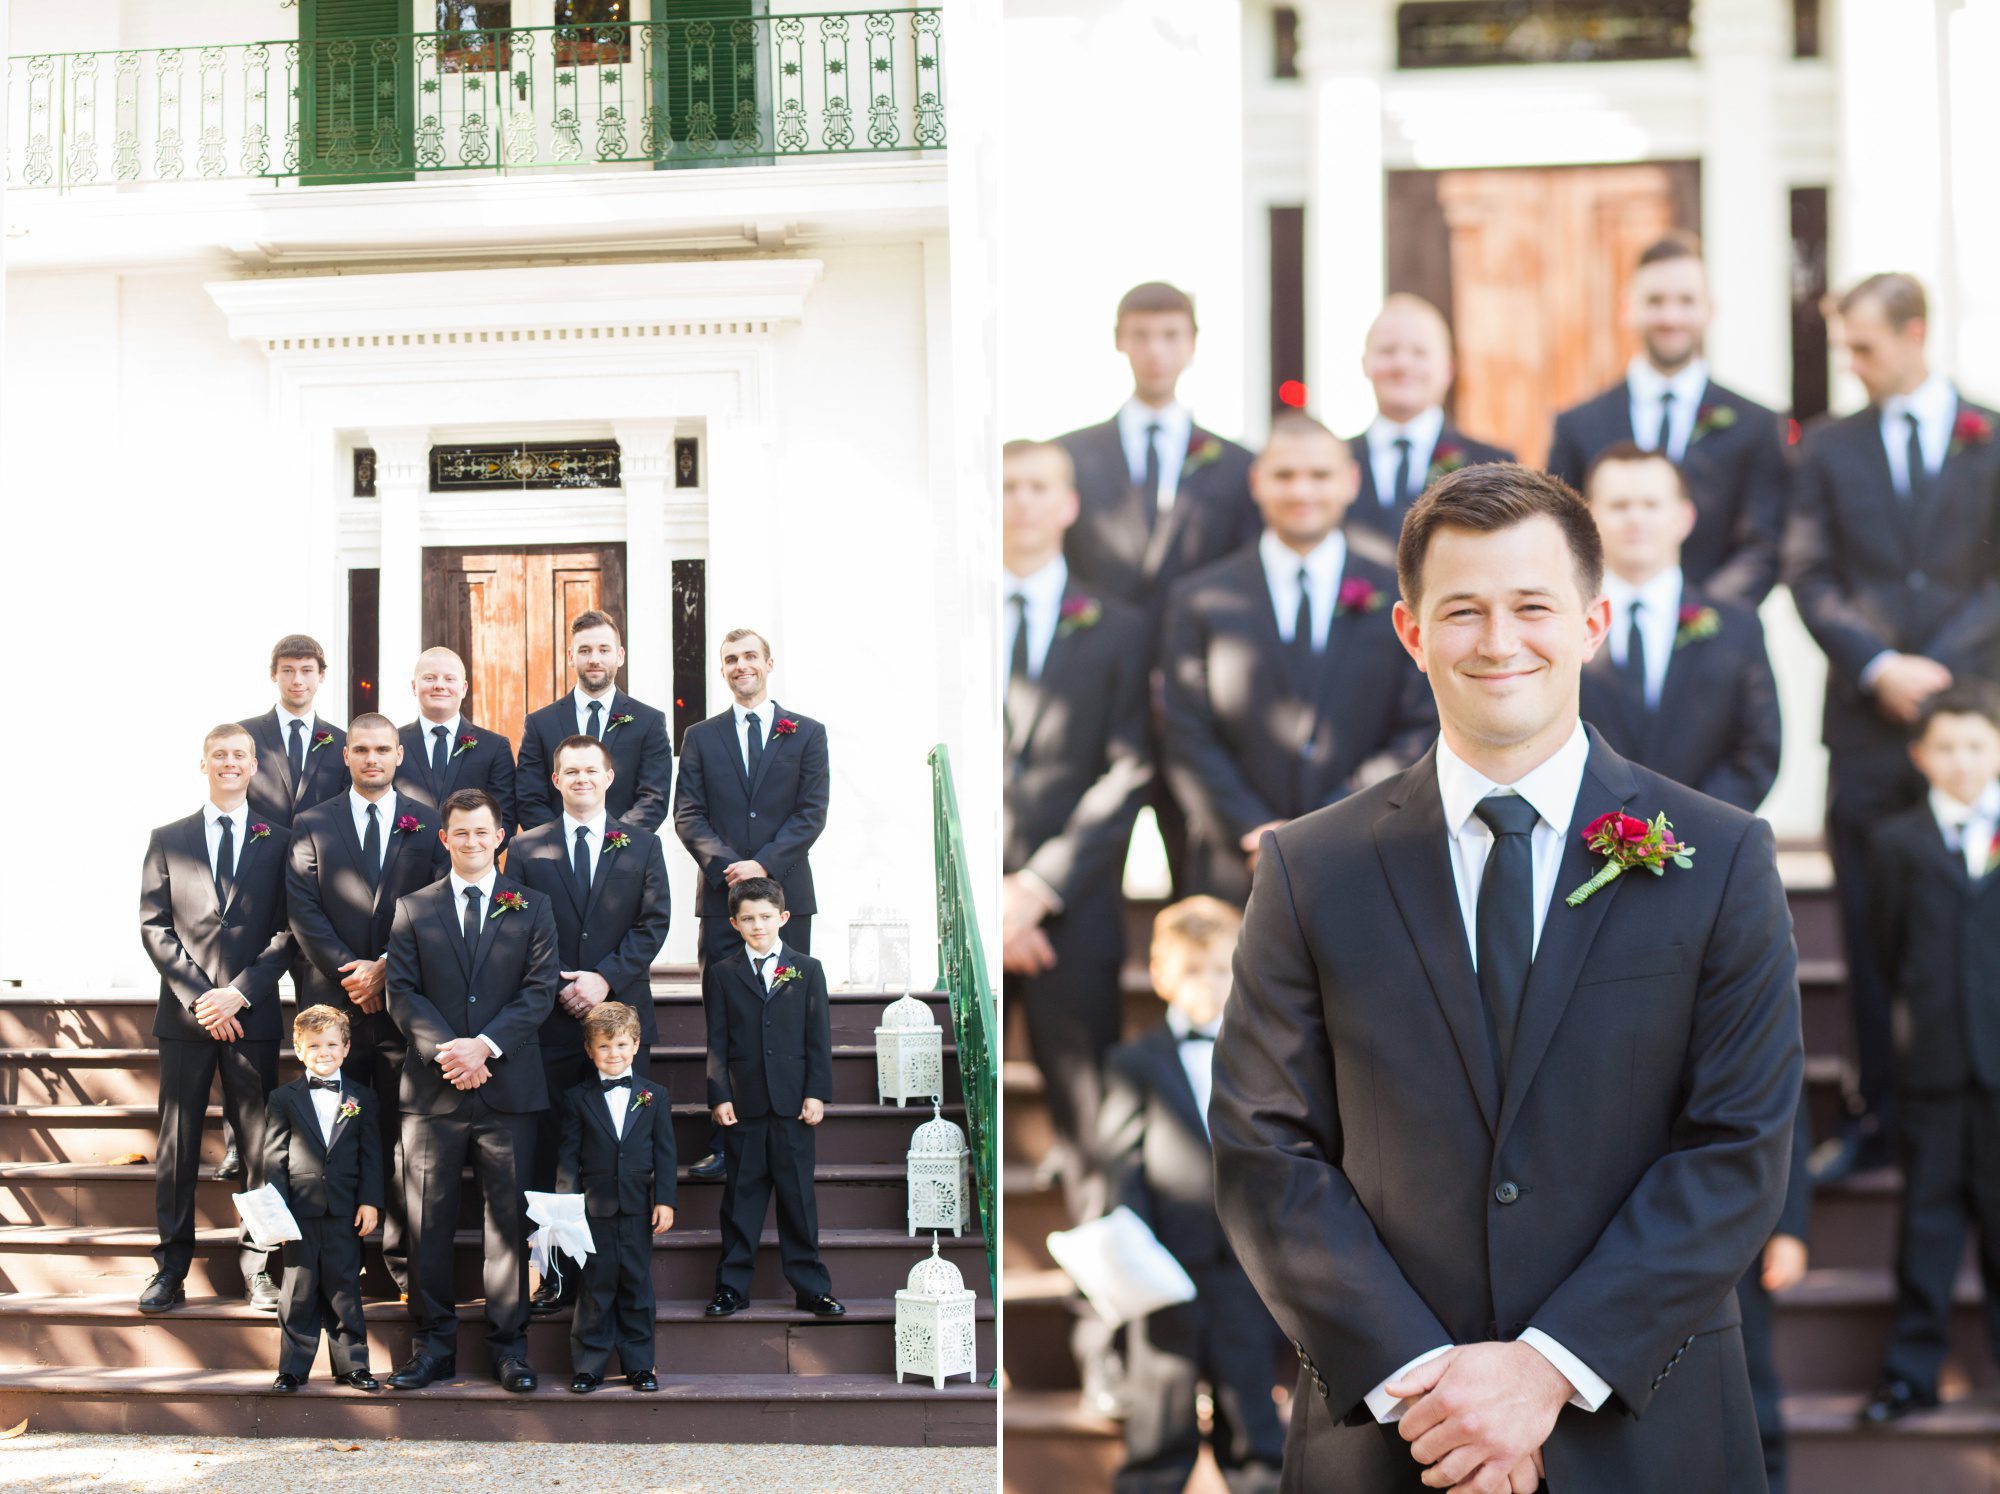 Groom and groomsmen do photos before wedding ceremony at Riverwood Mansion in Nashville, Tennessee. Photography by Krista Lee.